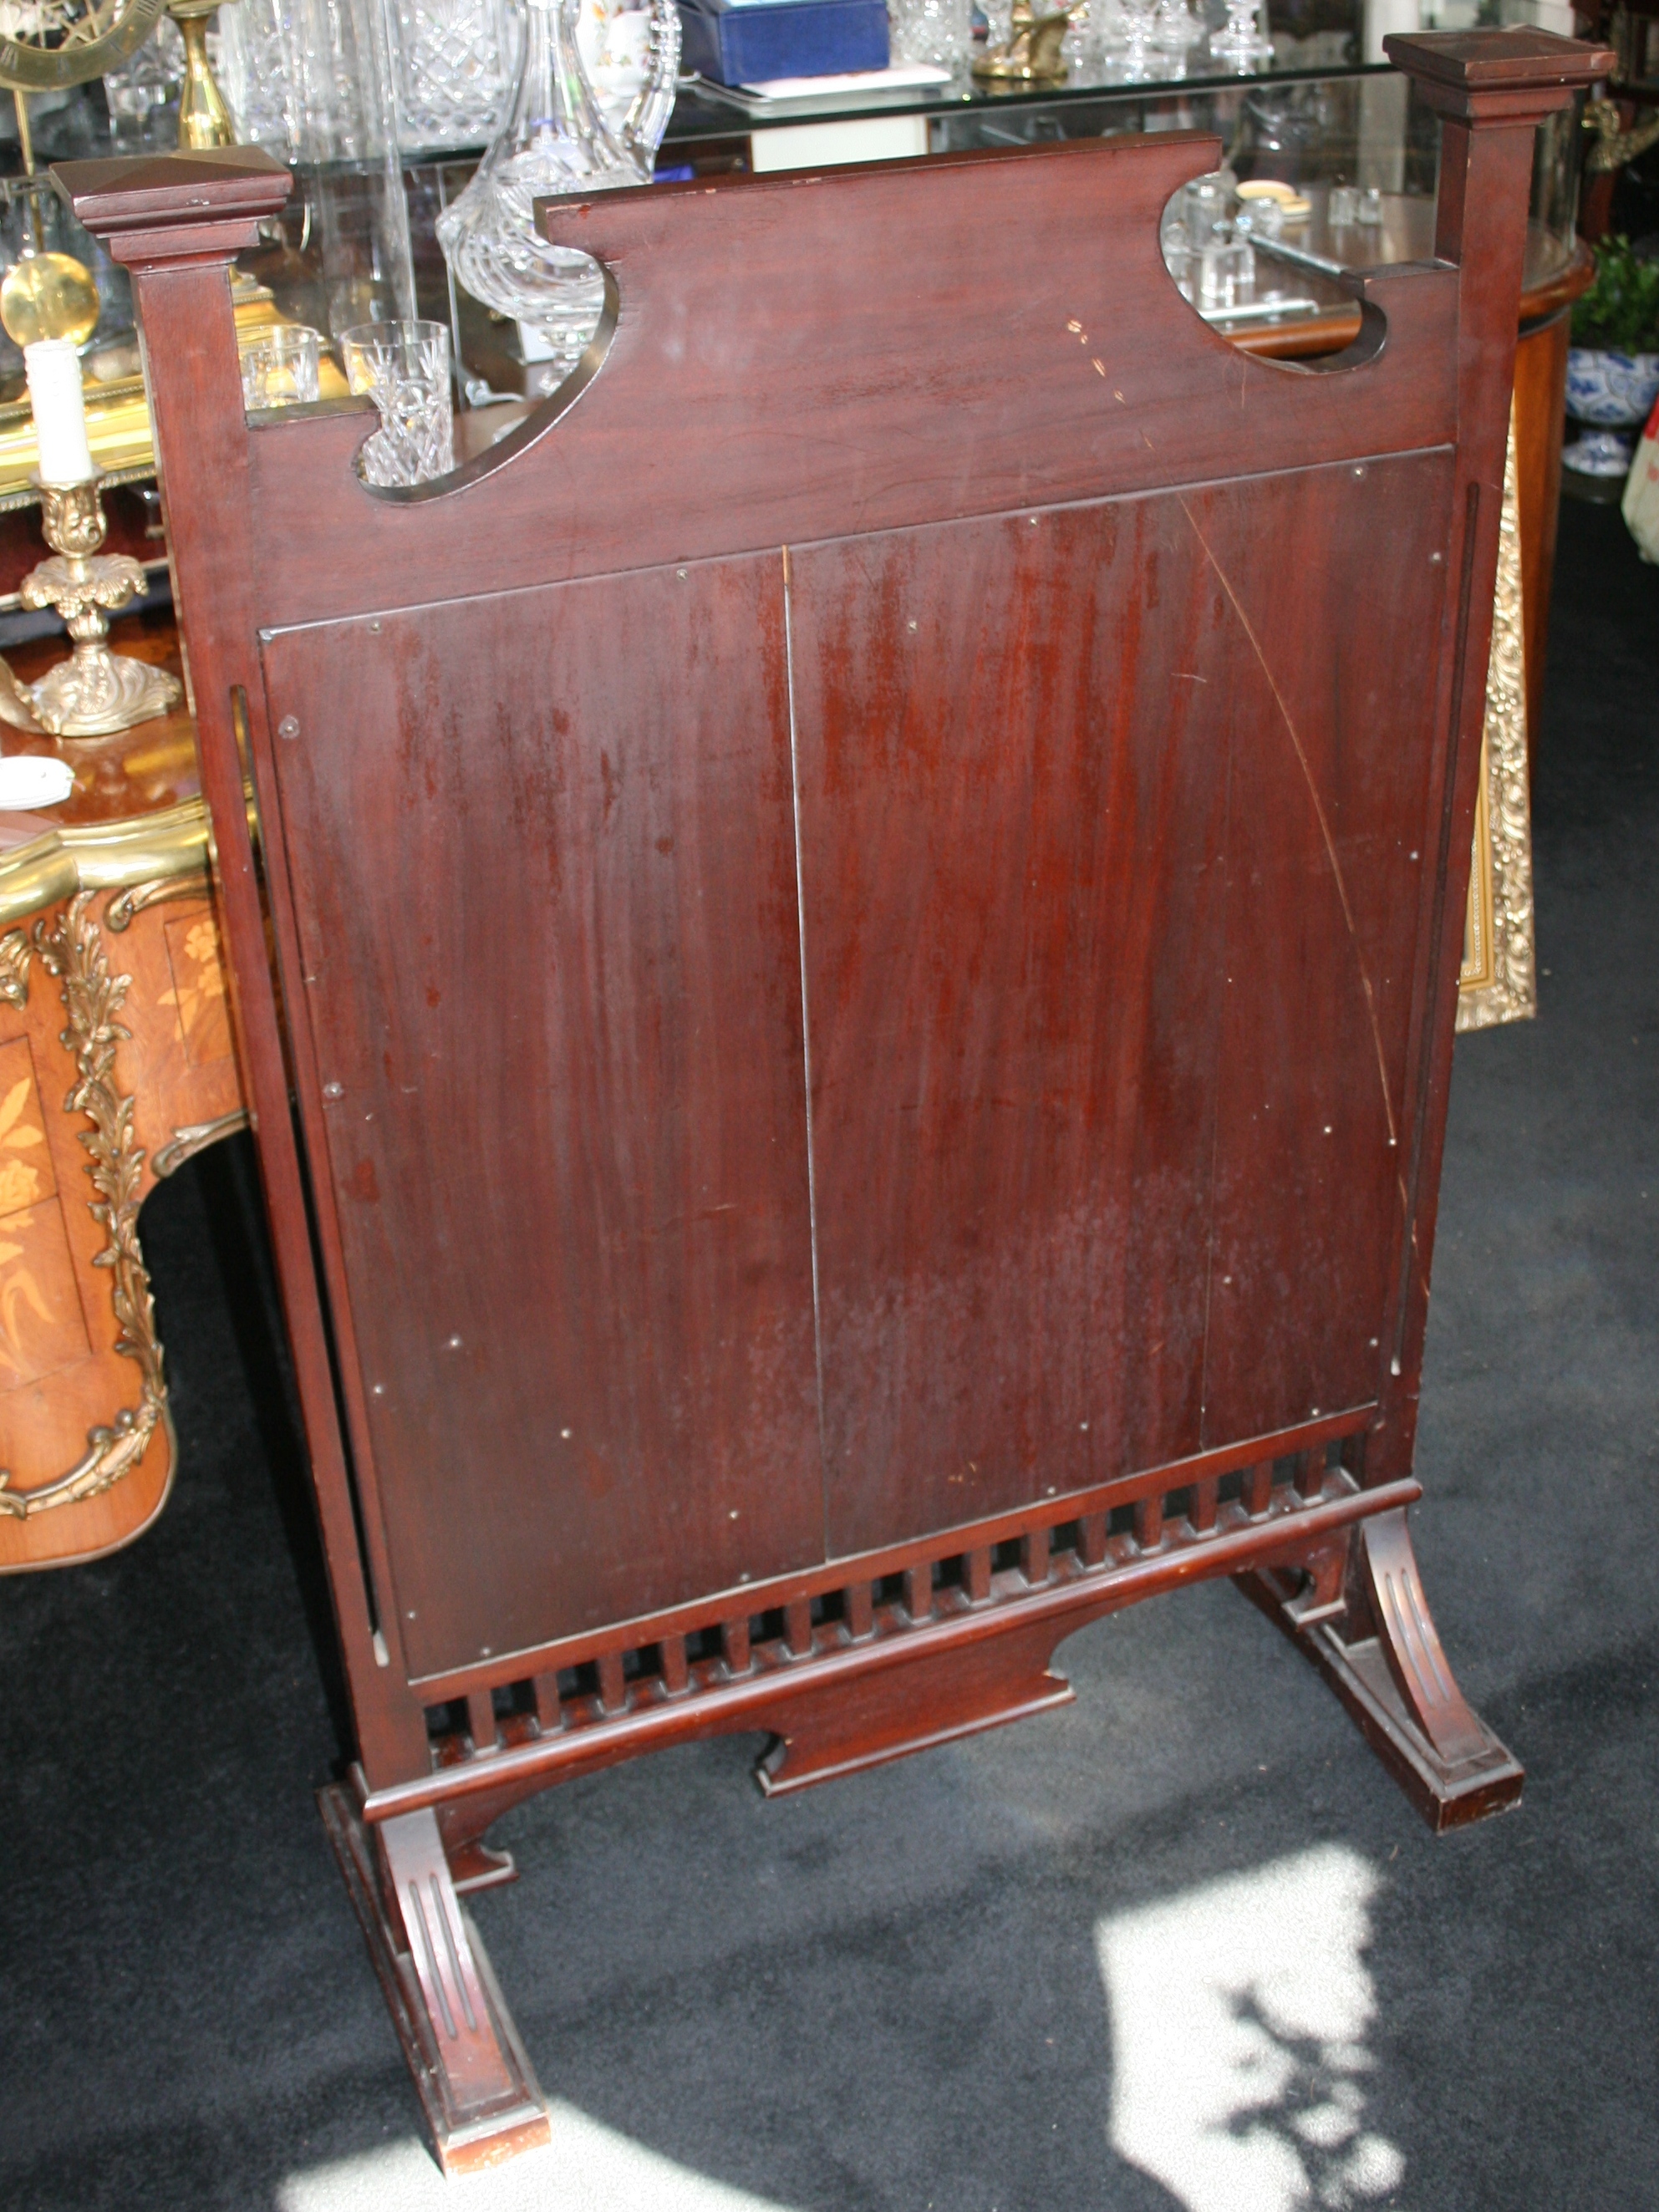 Edwardian Mahogany Engraved Mirrored Fire Screen - Image 7 of 7